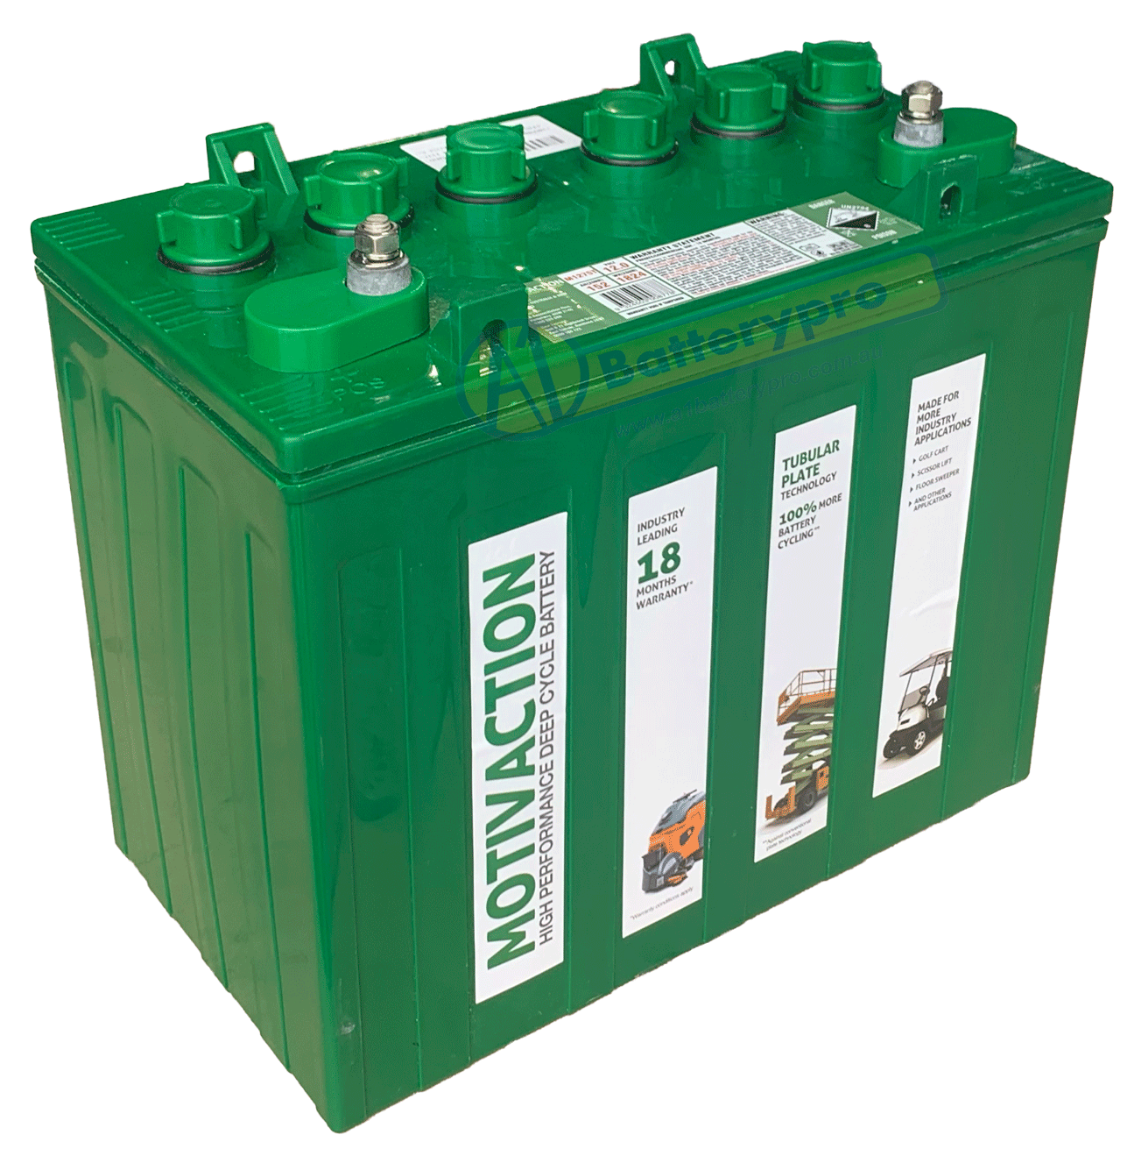 Picture of 12V 152AMP HOUR MOTIVACTION DEEP CYCLE BATTERY- 18 MTHS WARRANTY - EQUIV TO T1275